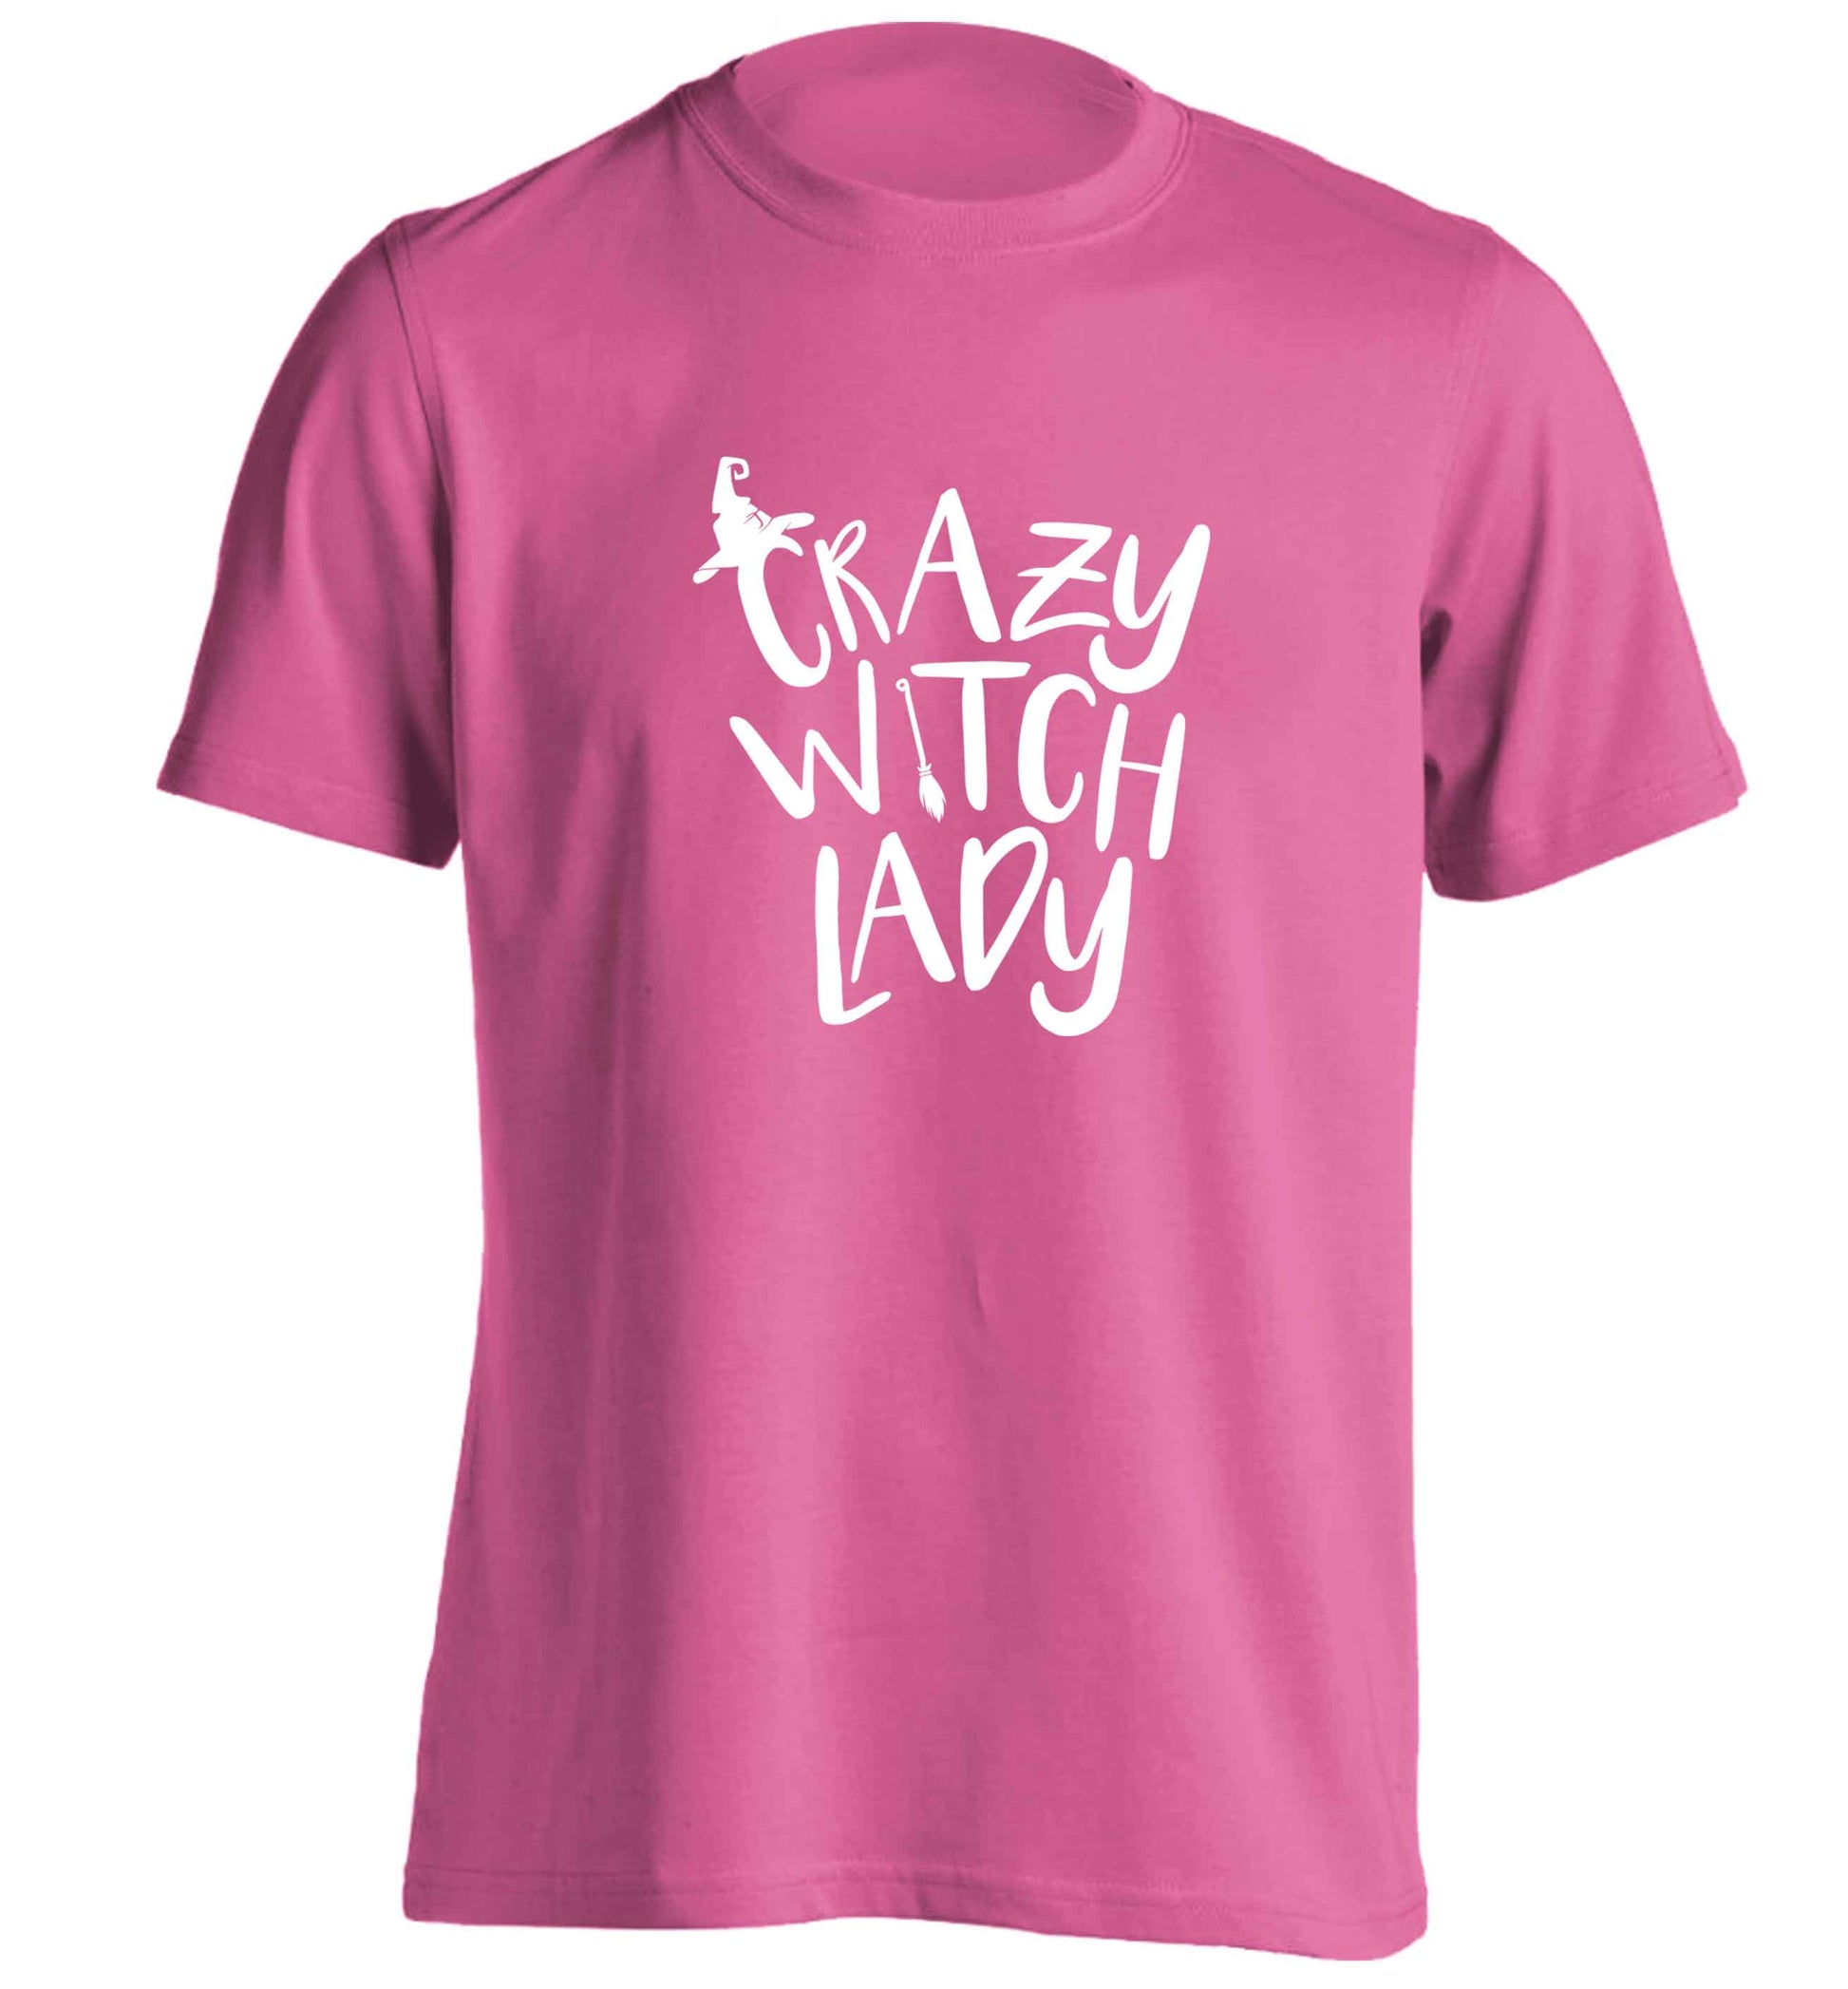 Crazy witch lady adults unisex pink Tshirt 2XL